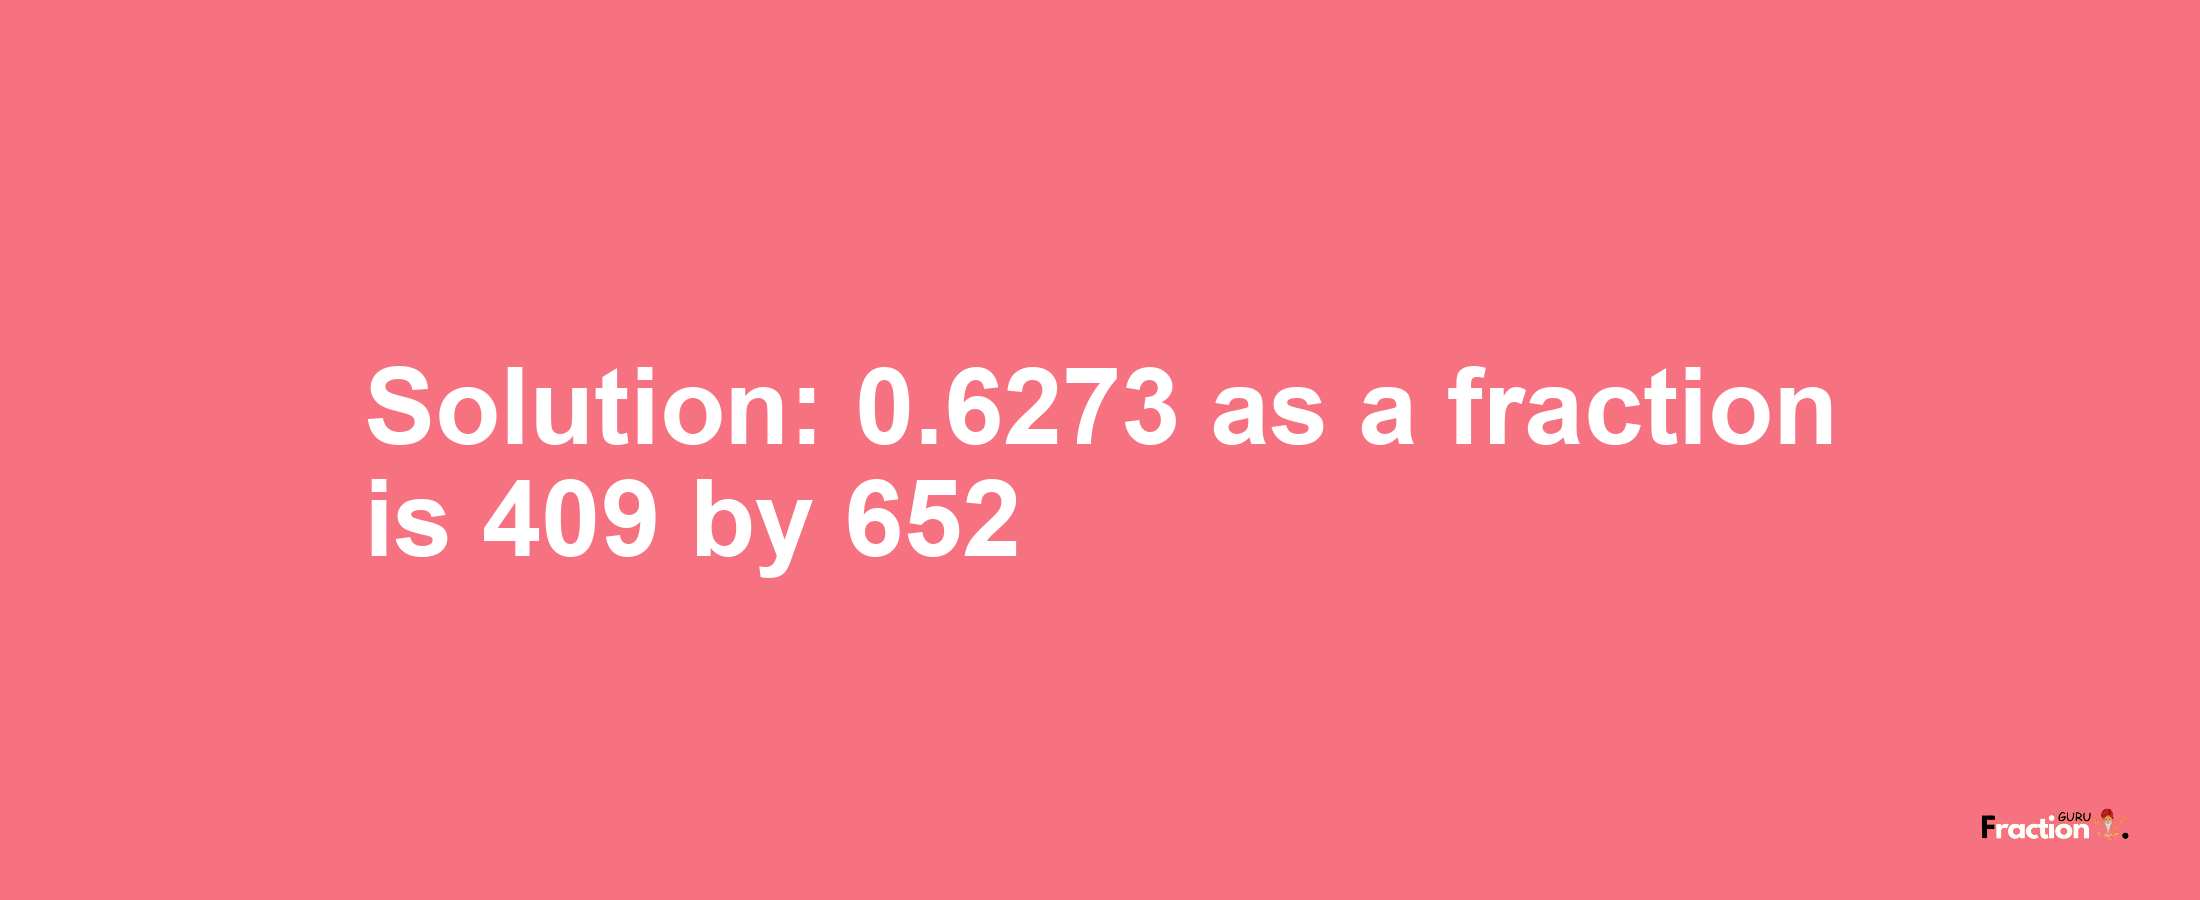 Solution:0.6273 as a fraction is 409/652